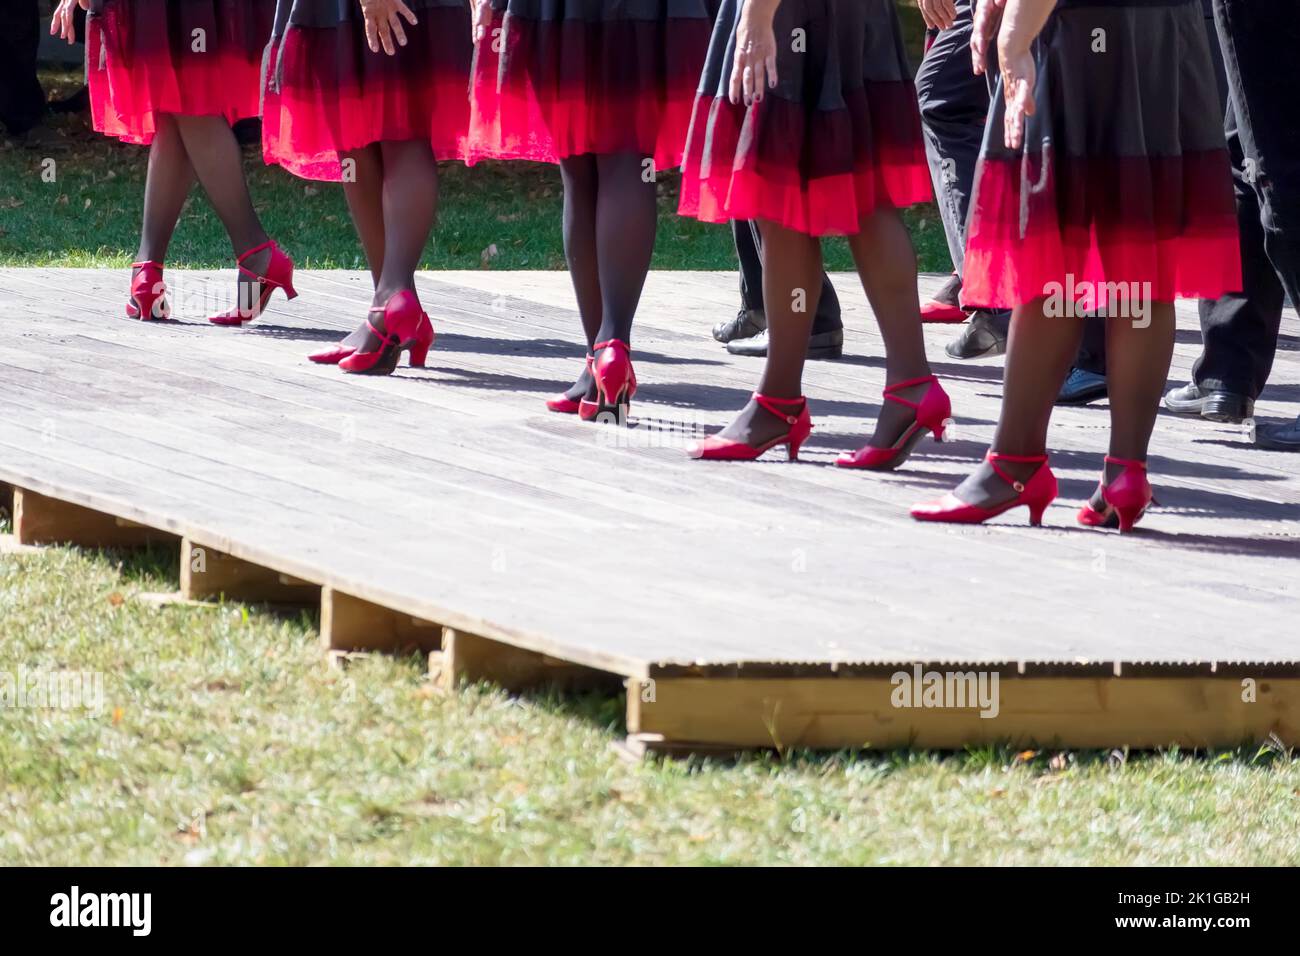 The dance team dances on the light brown stage with pink shoes and black and pink skirts Stock Photo